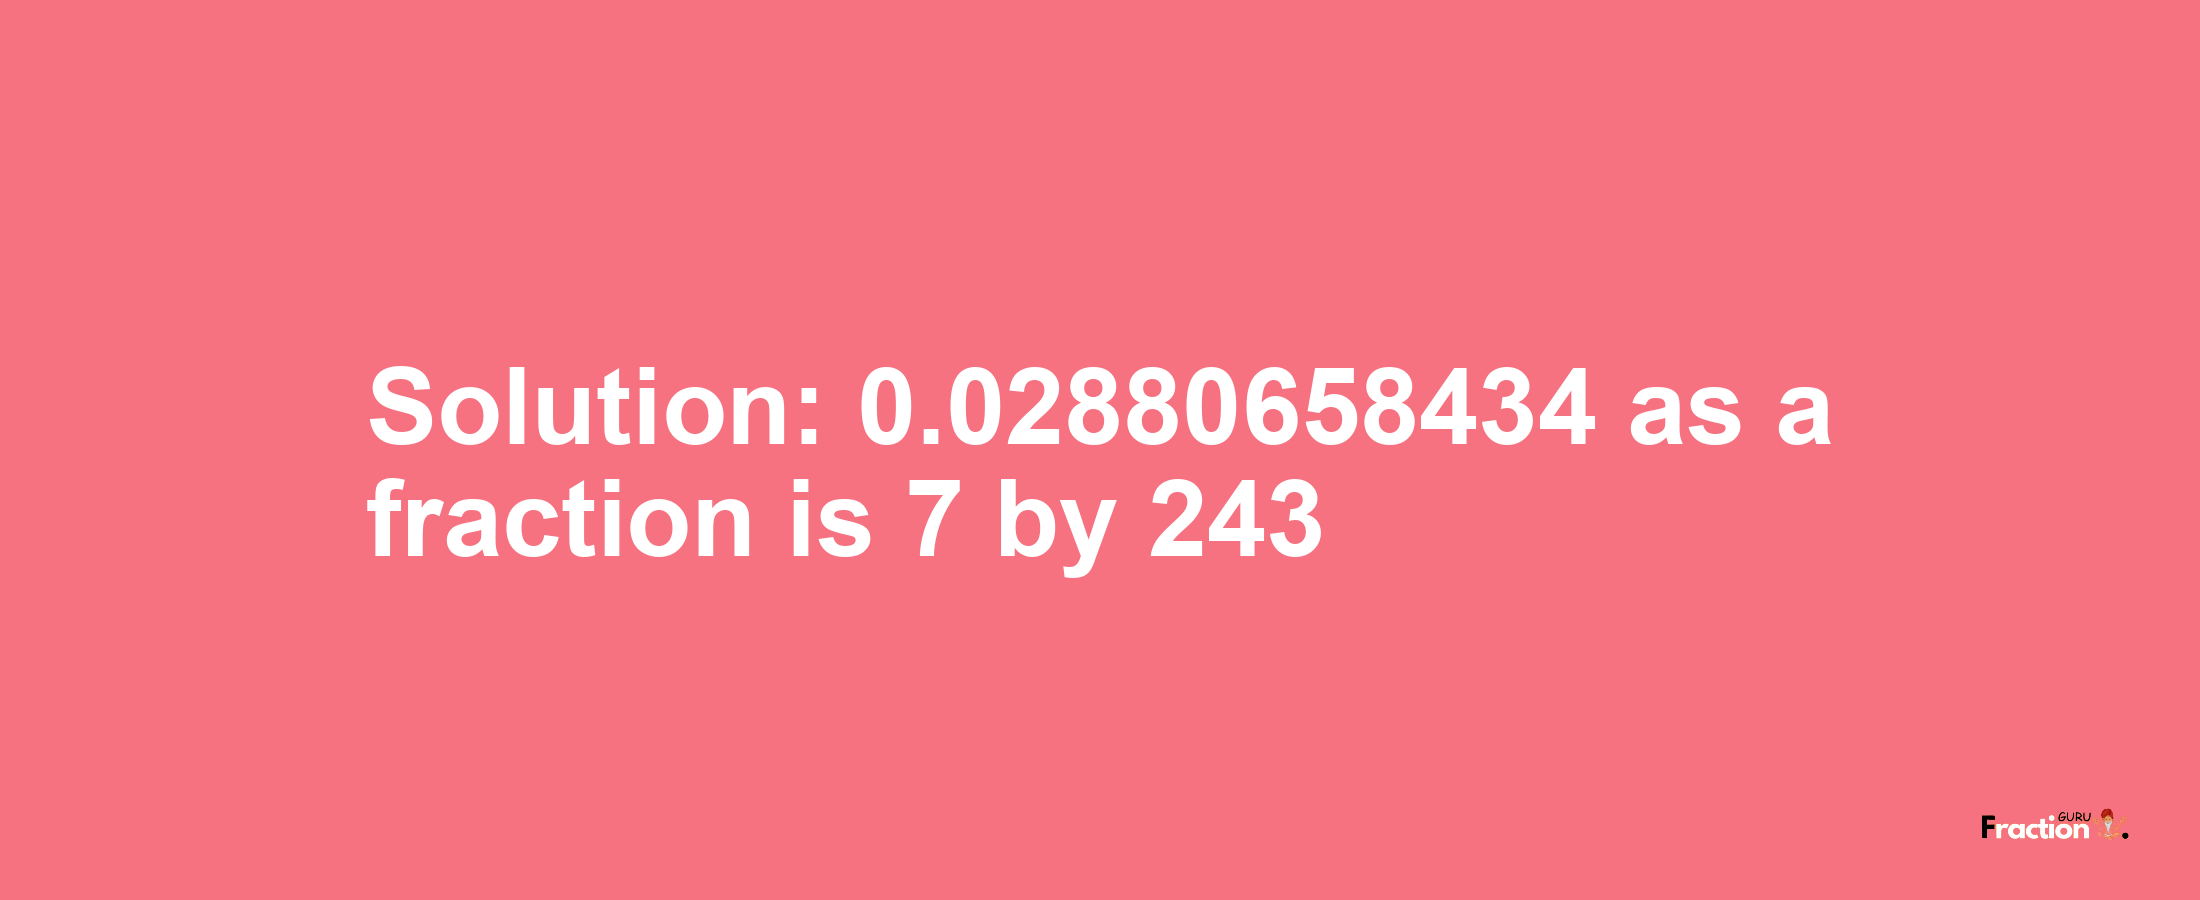 Solution:0.02880658434 as a fraction is 7/243